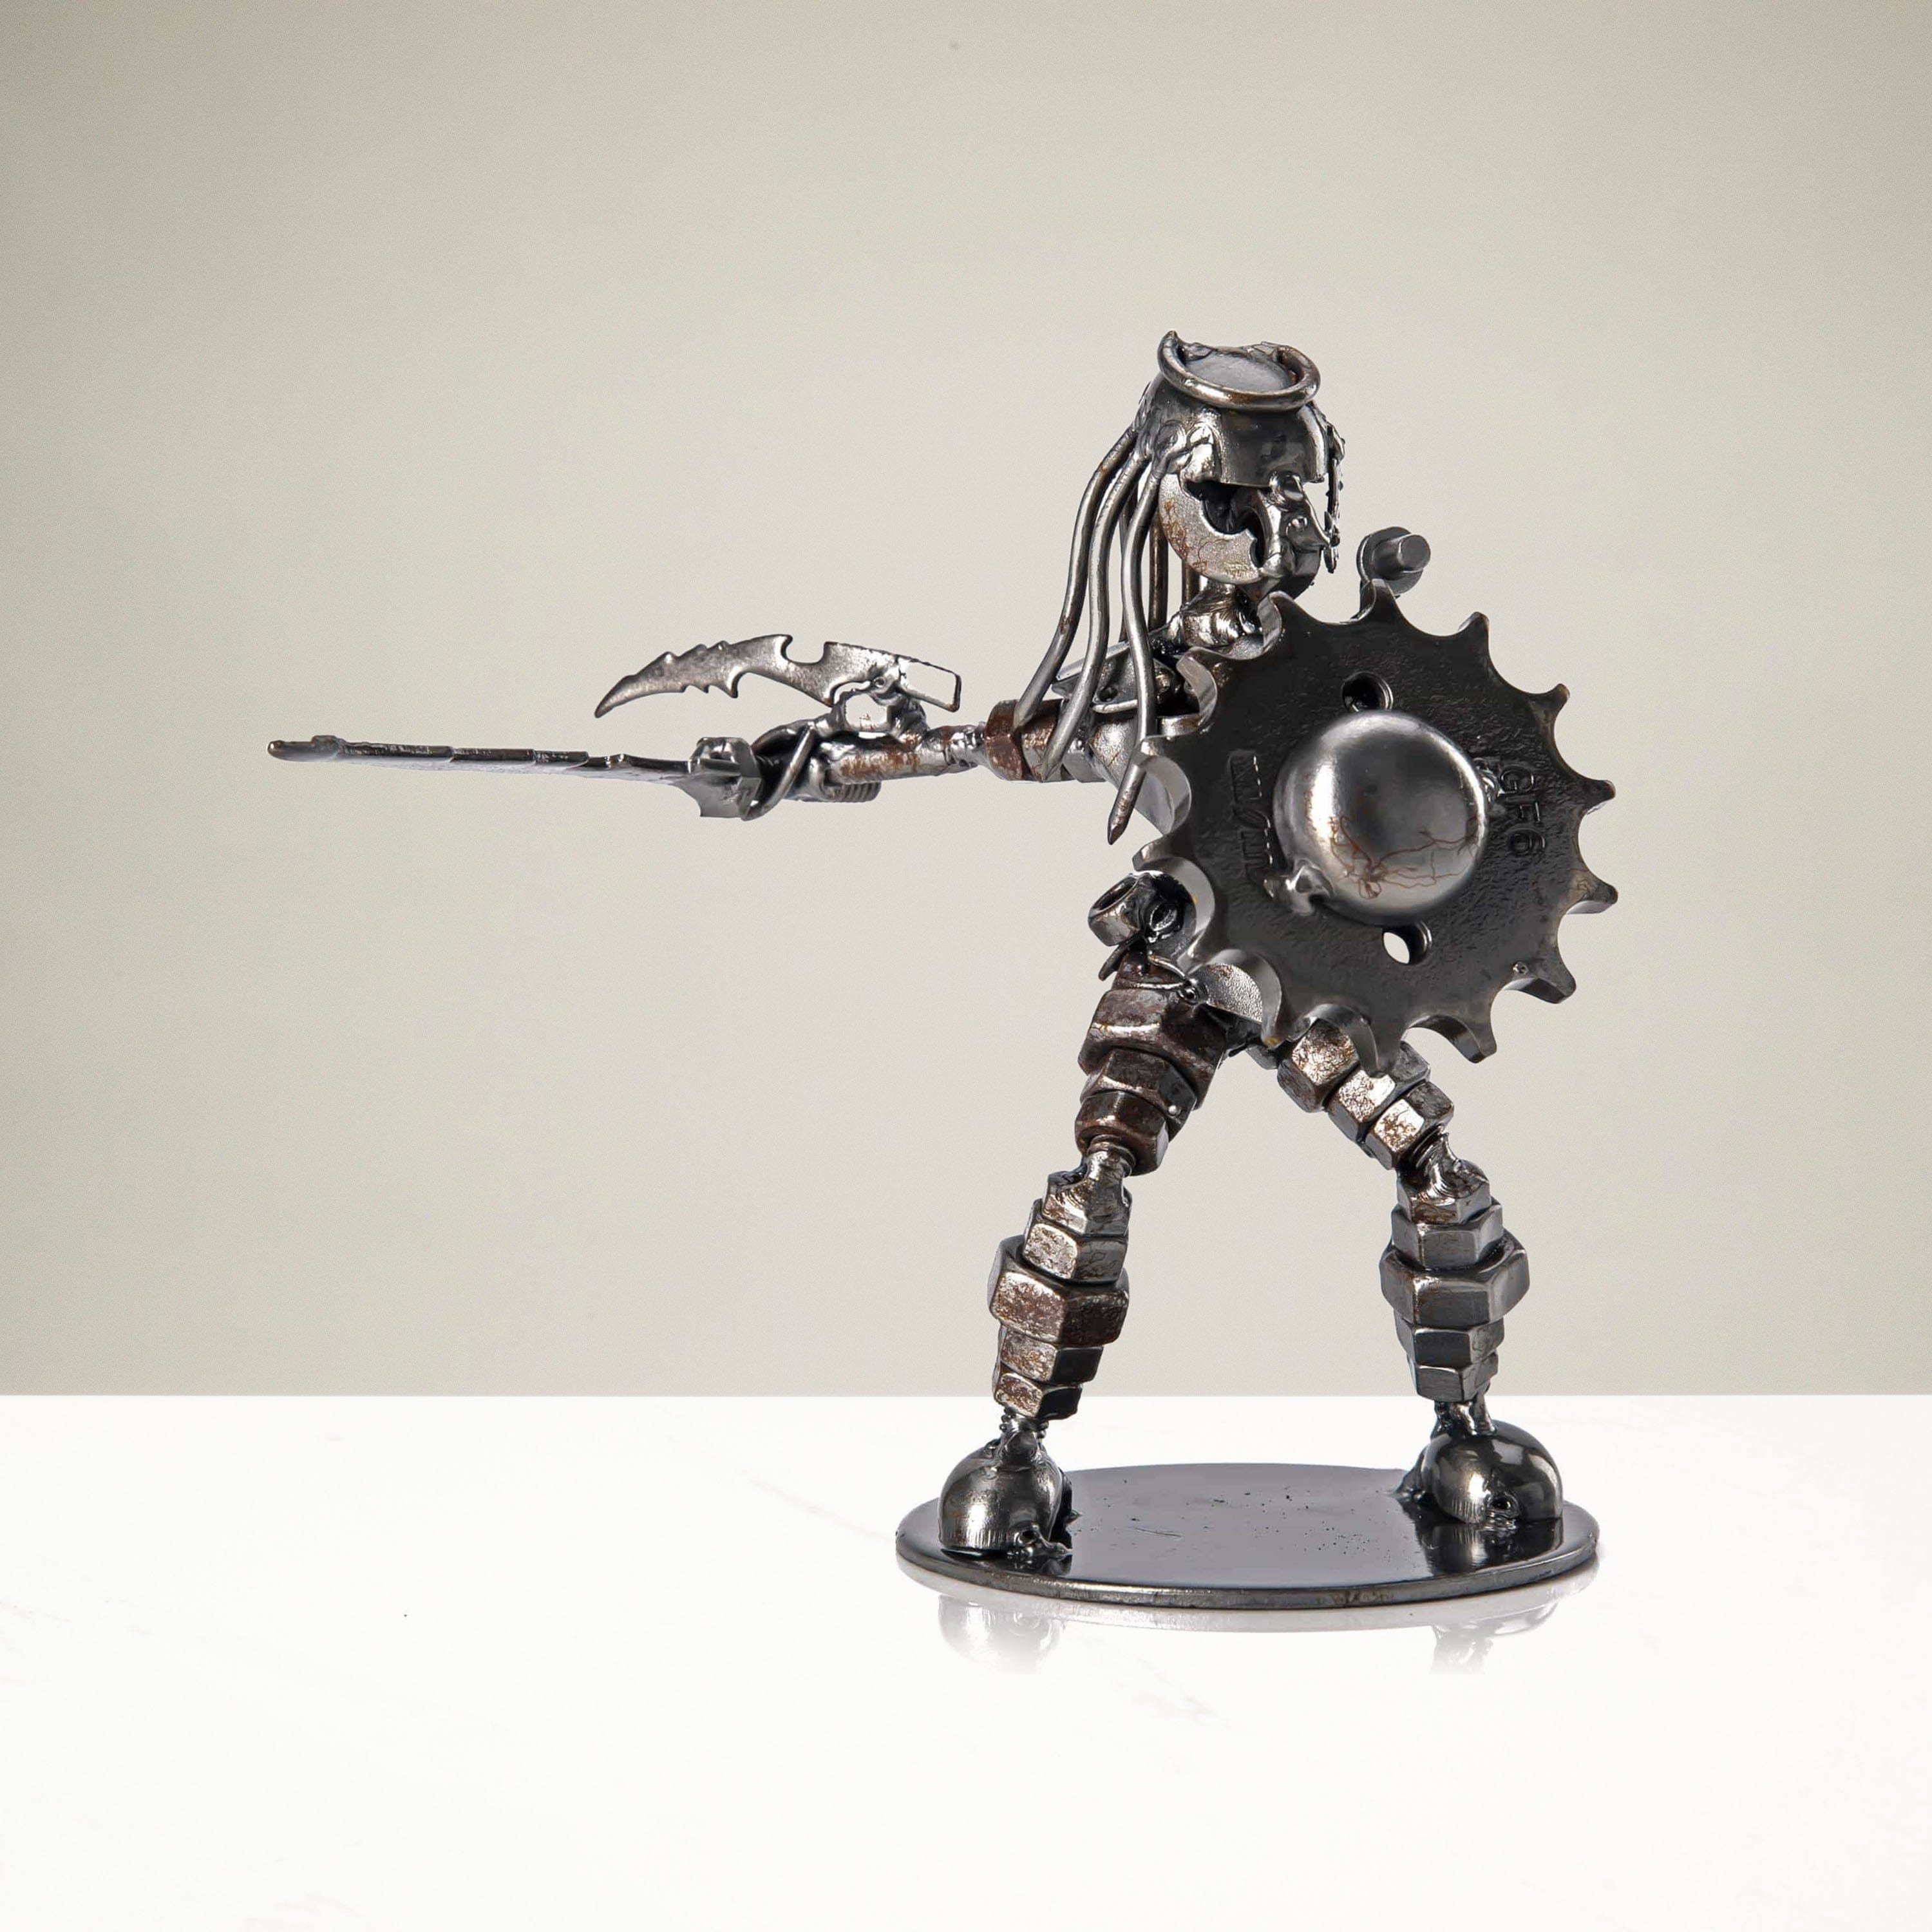 Kalifano Recycled Metal Art Predator with Sword and Shield Inspired Recycled Metal Sculpture RMS-250PA-N